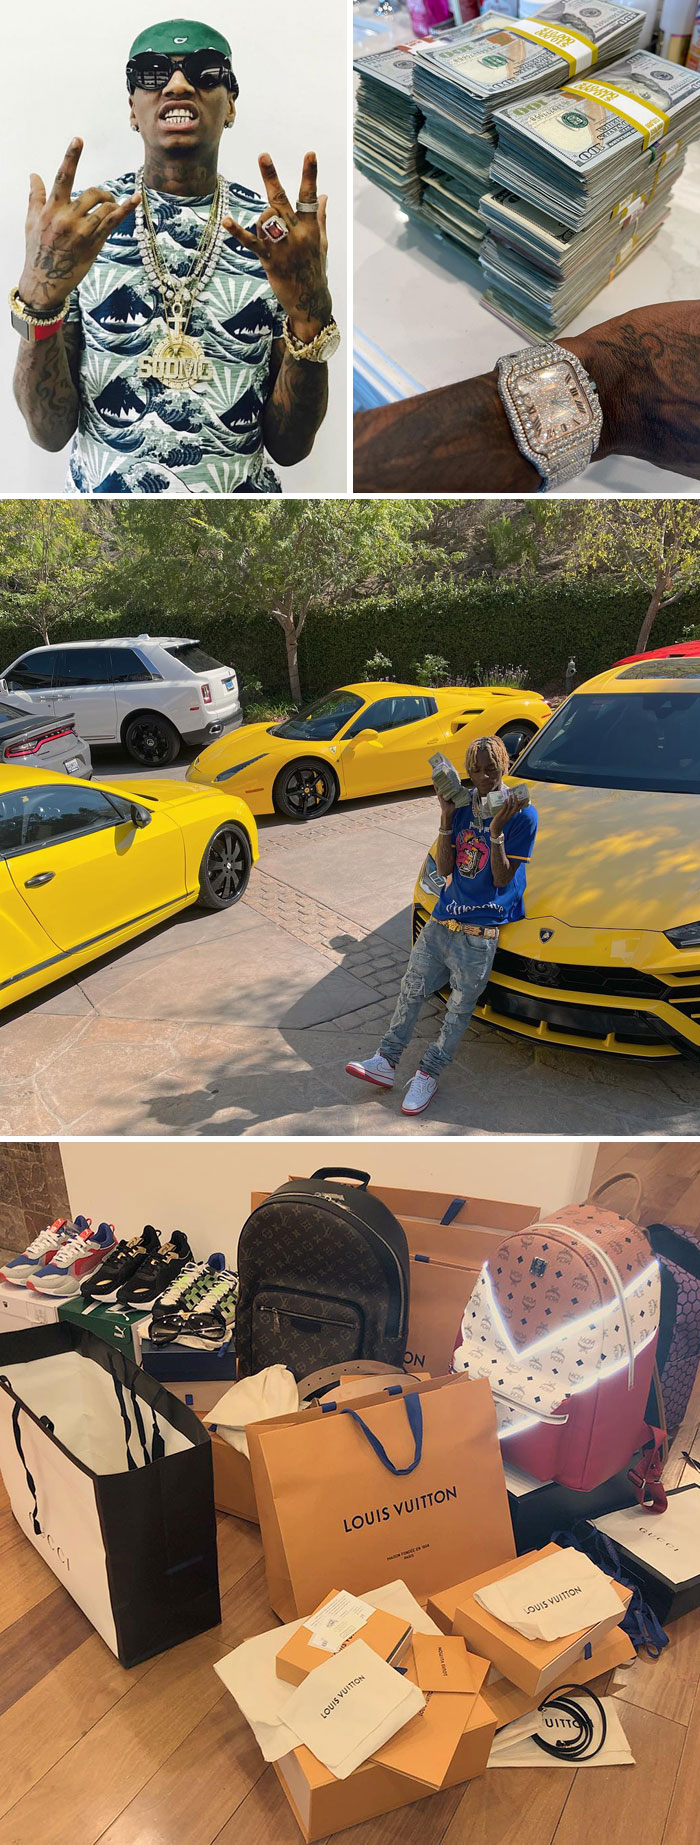 Soulja Boy Flaunts On Instagram His Stacks Of Cash, Jewelry, Designer Watches And Cars